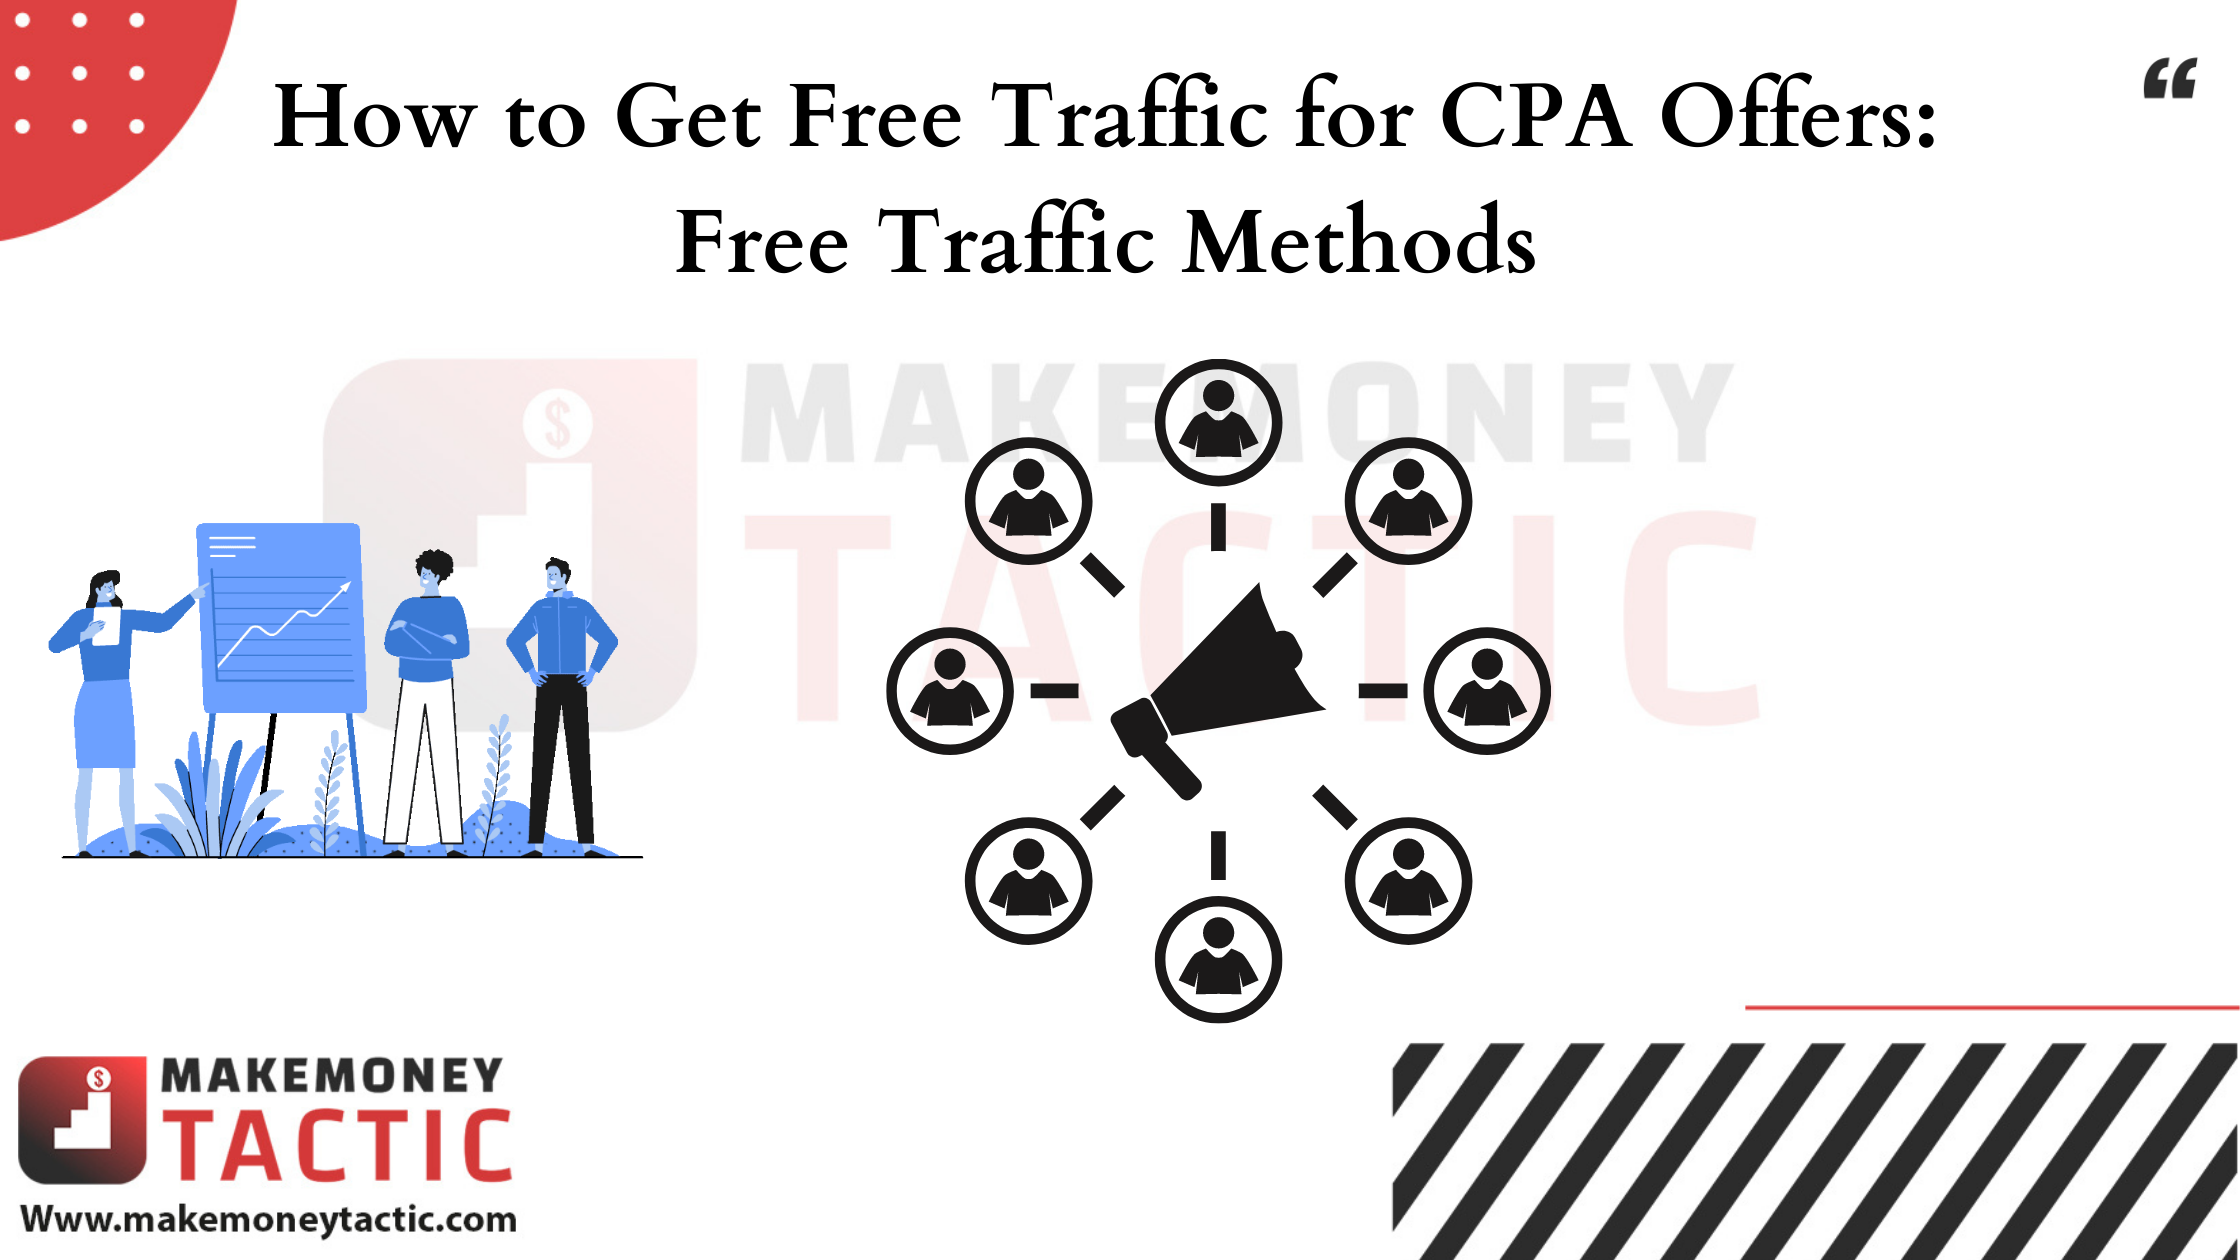 What's the best traffic source for cpa offers? - Quora